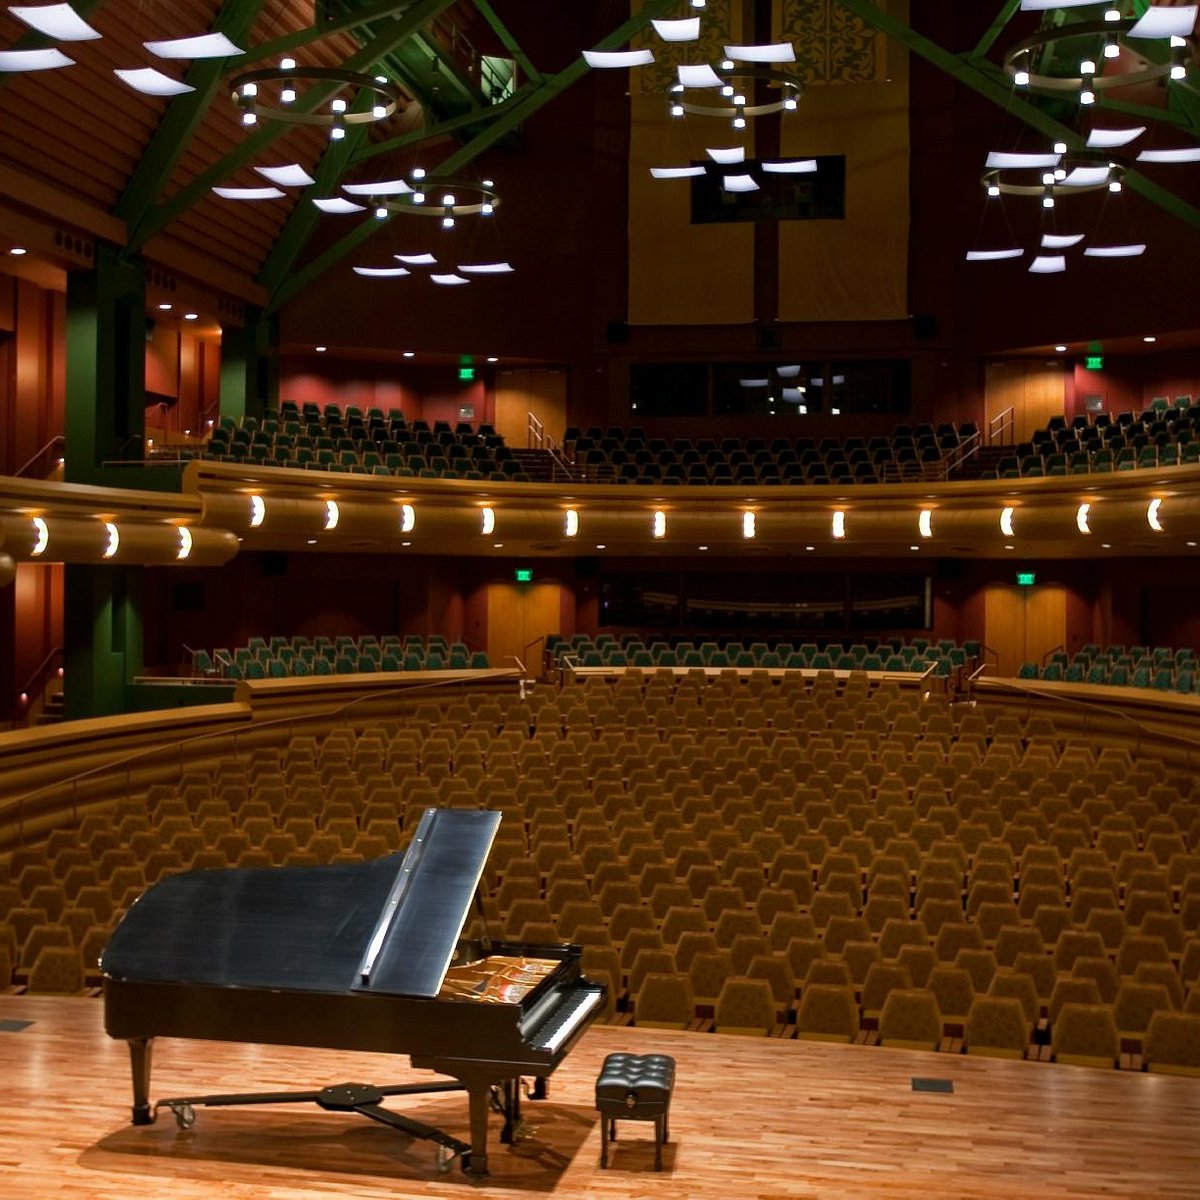 DEBARTOLO PERFORMING ARTS CENTER (South Bend) All You Need to Know